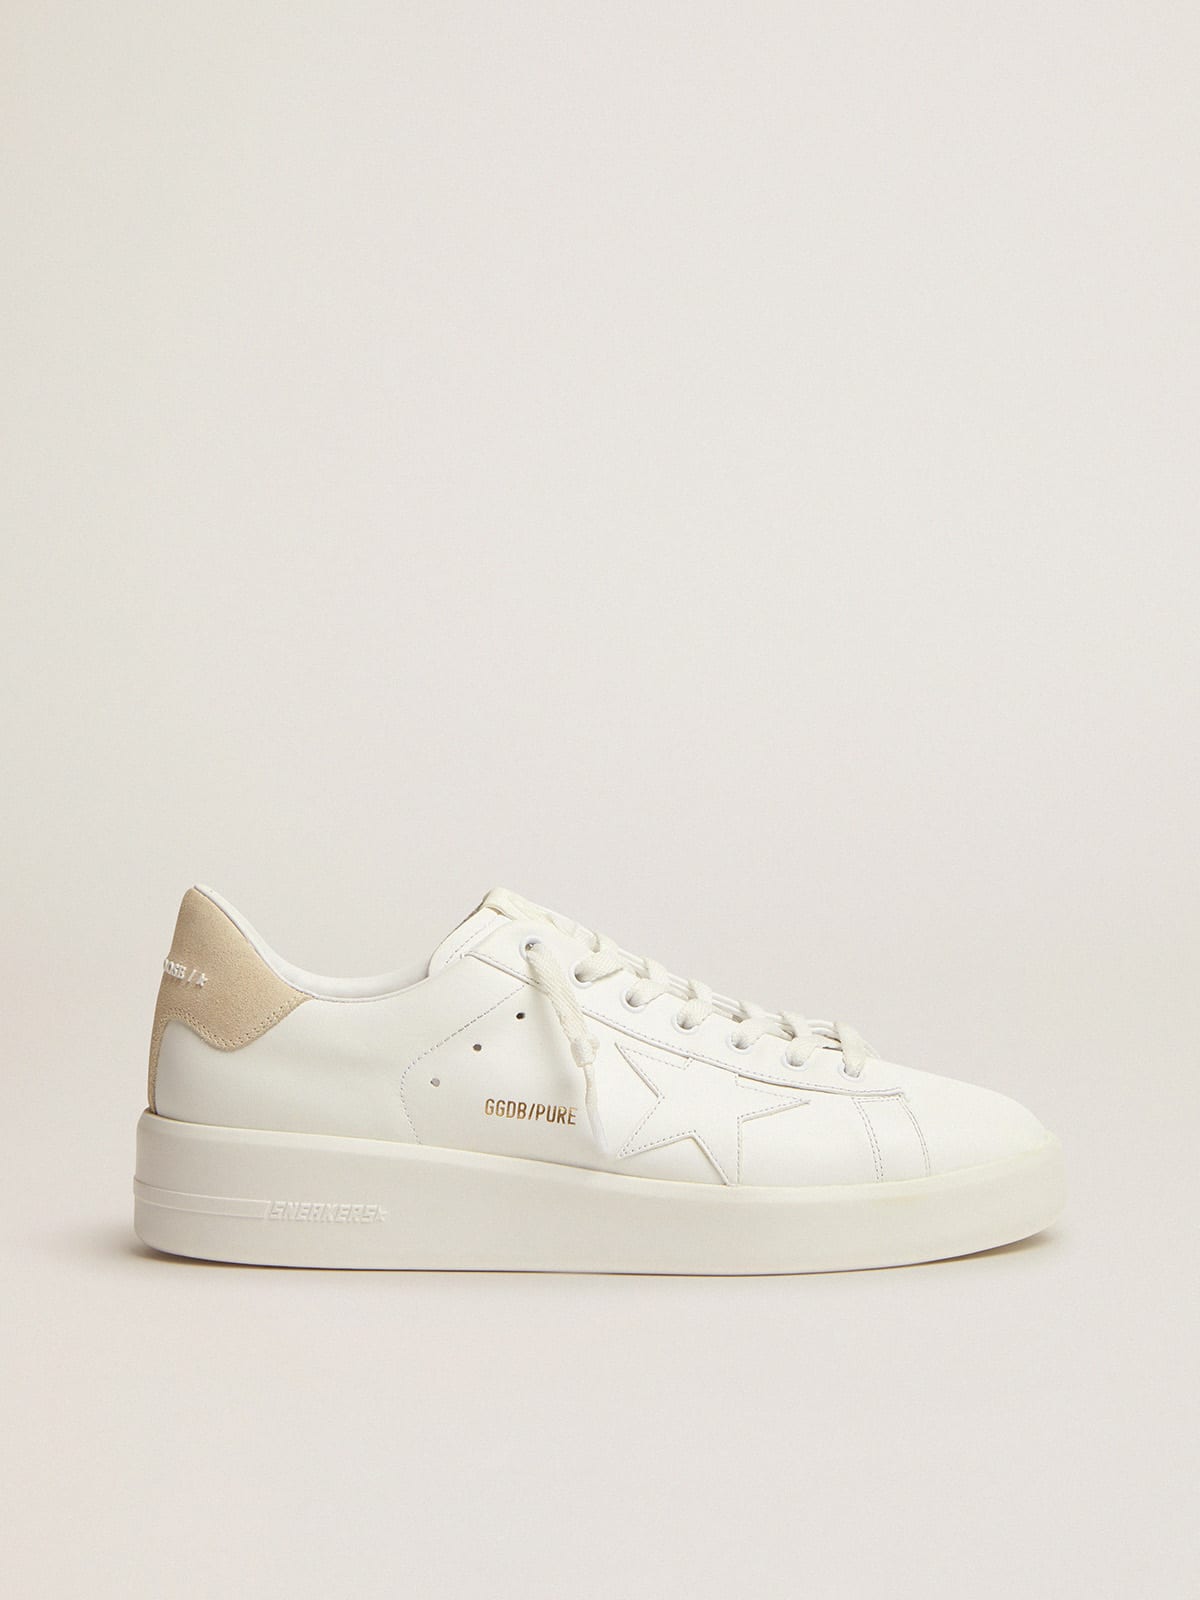 Purestar sneakers in white leather with cream suede heel tab | Golden Goose